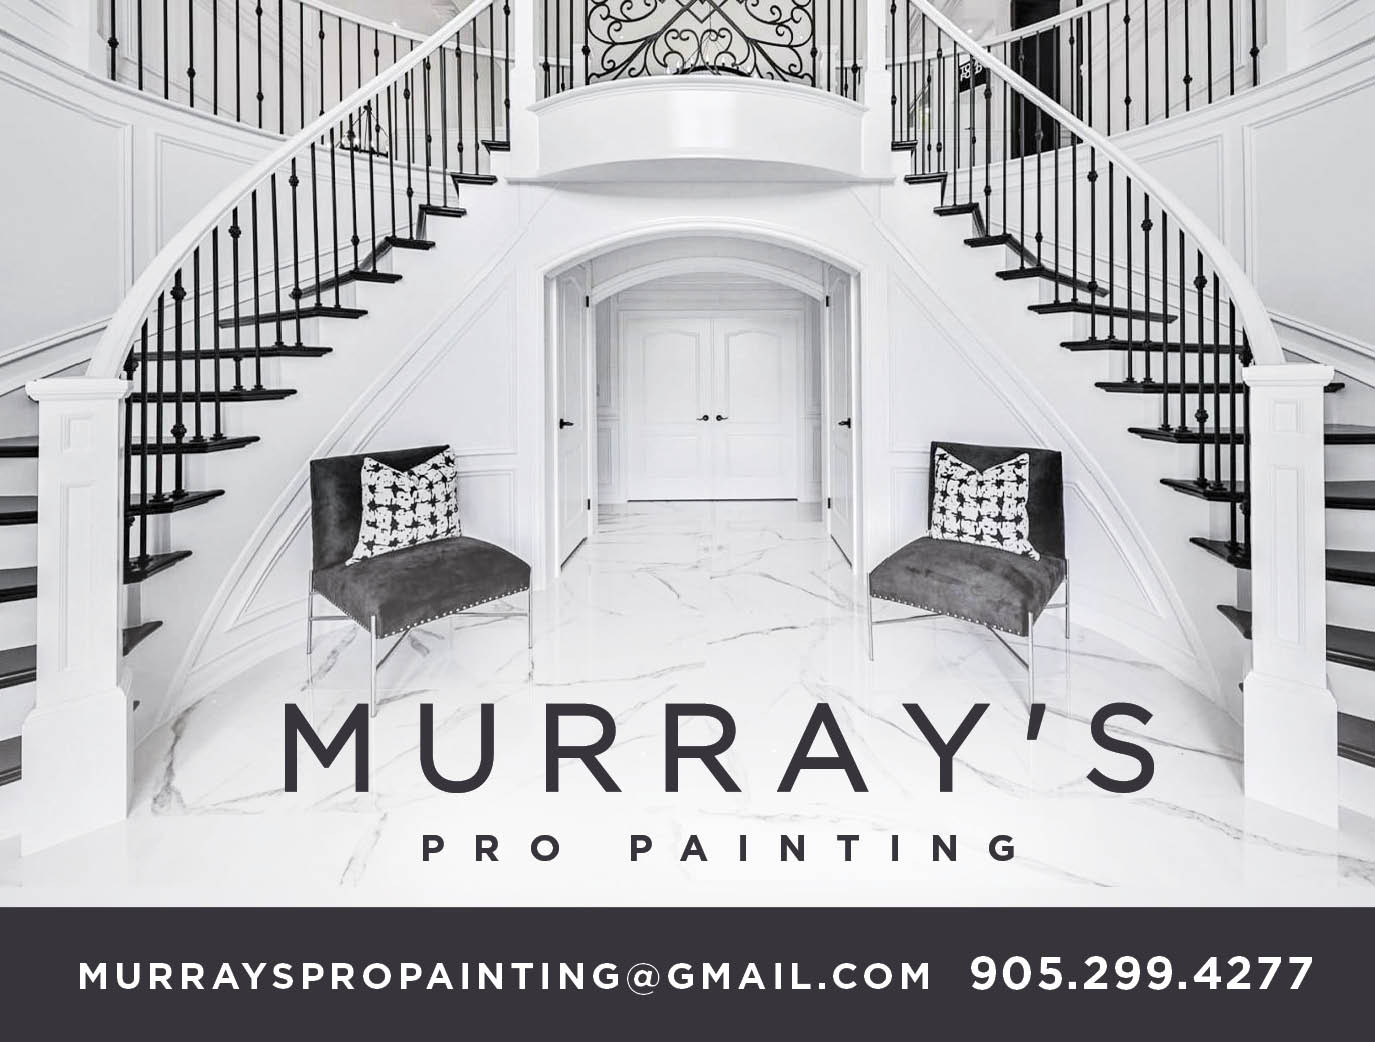 Murray's Pro Painting